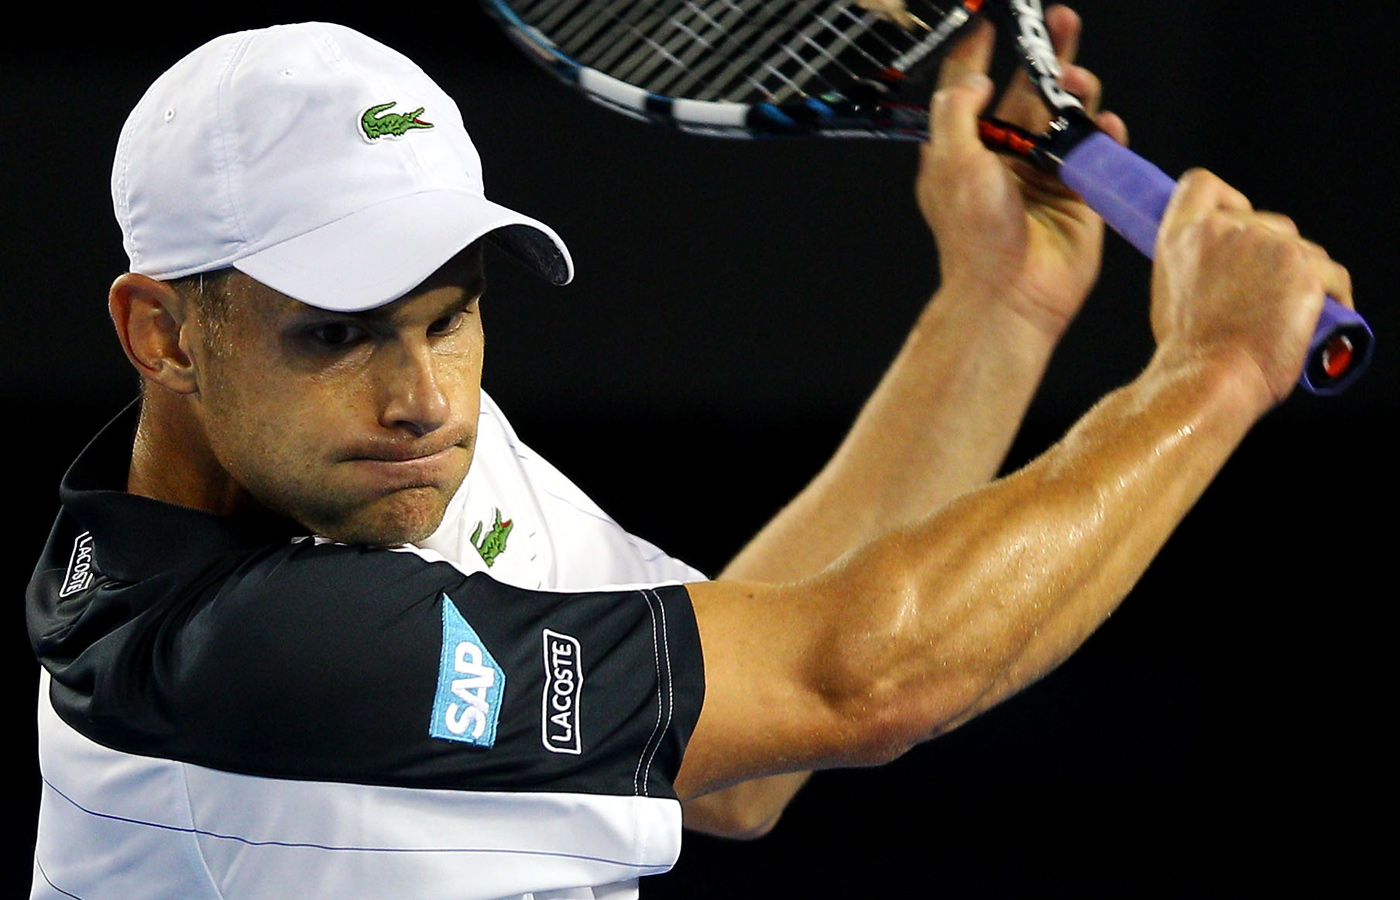 World Sports Hd Wallpapers: Andy Roddick Hd Wallpapers